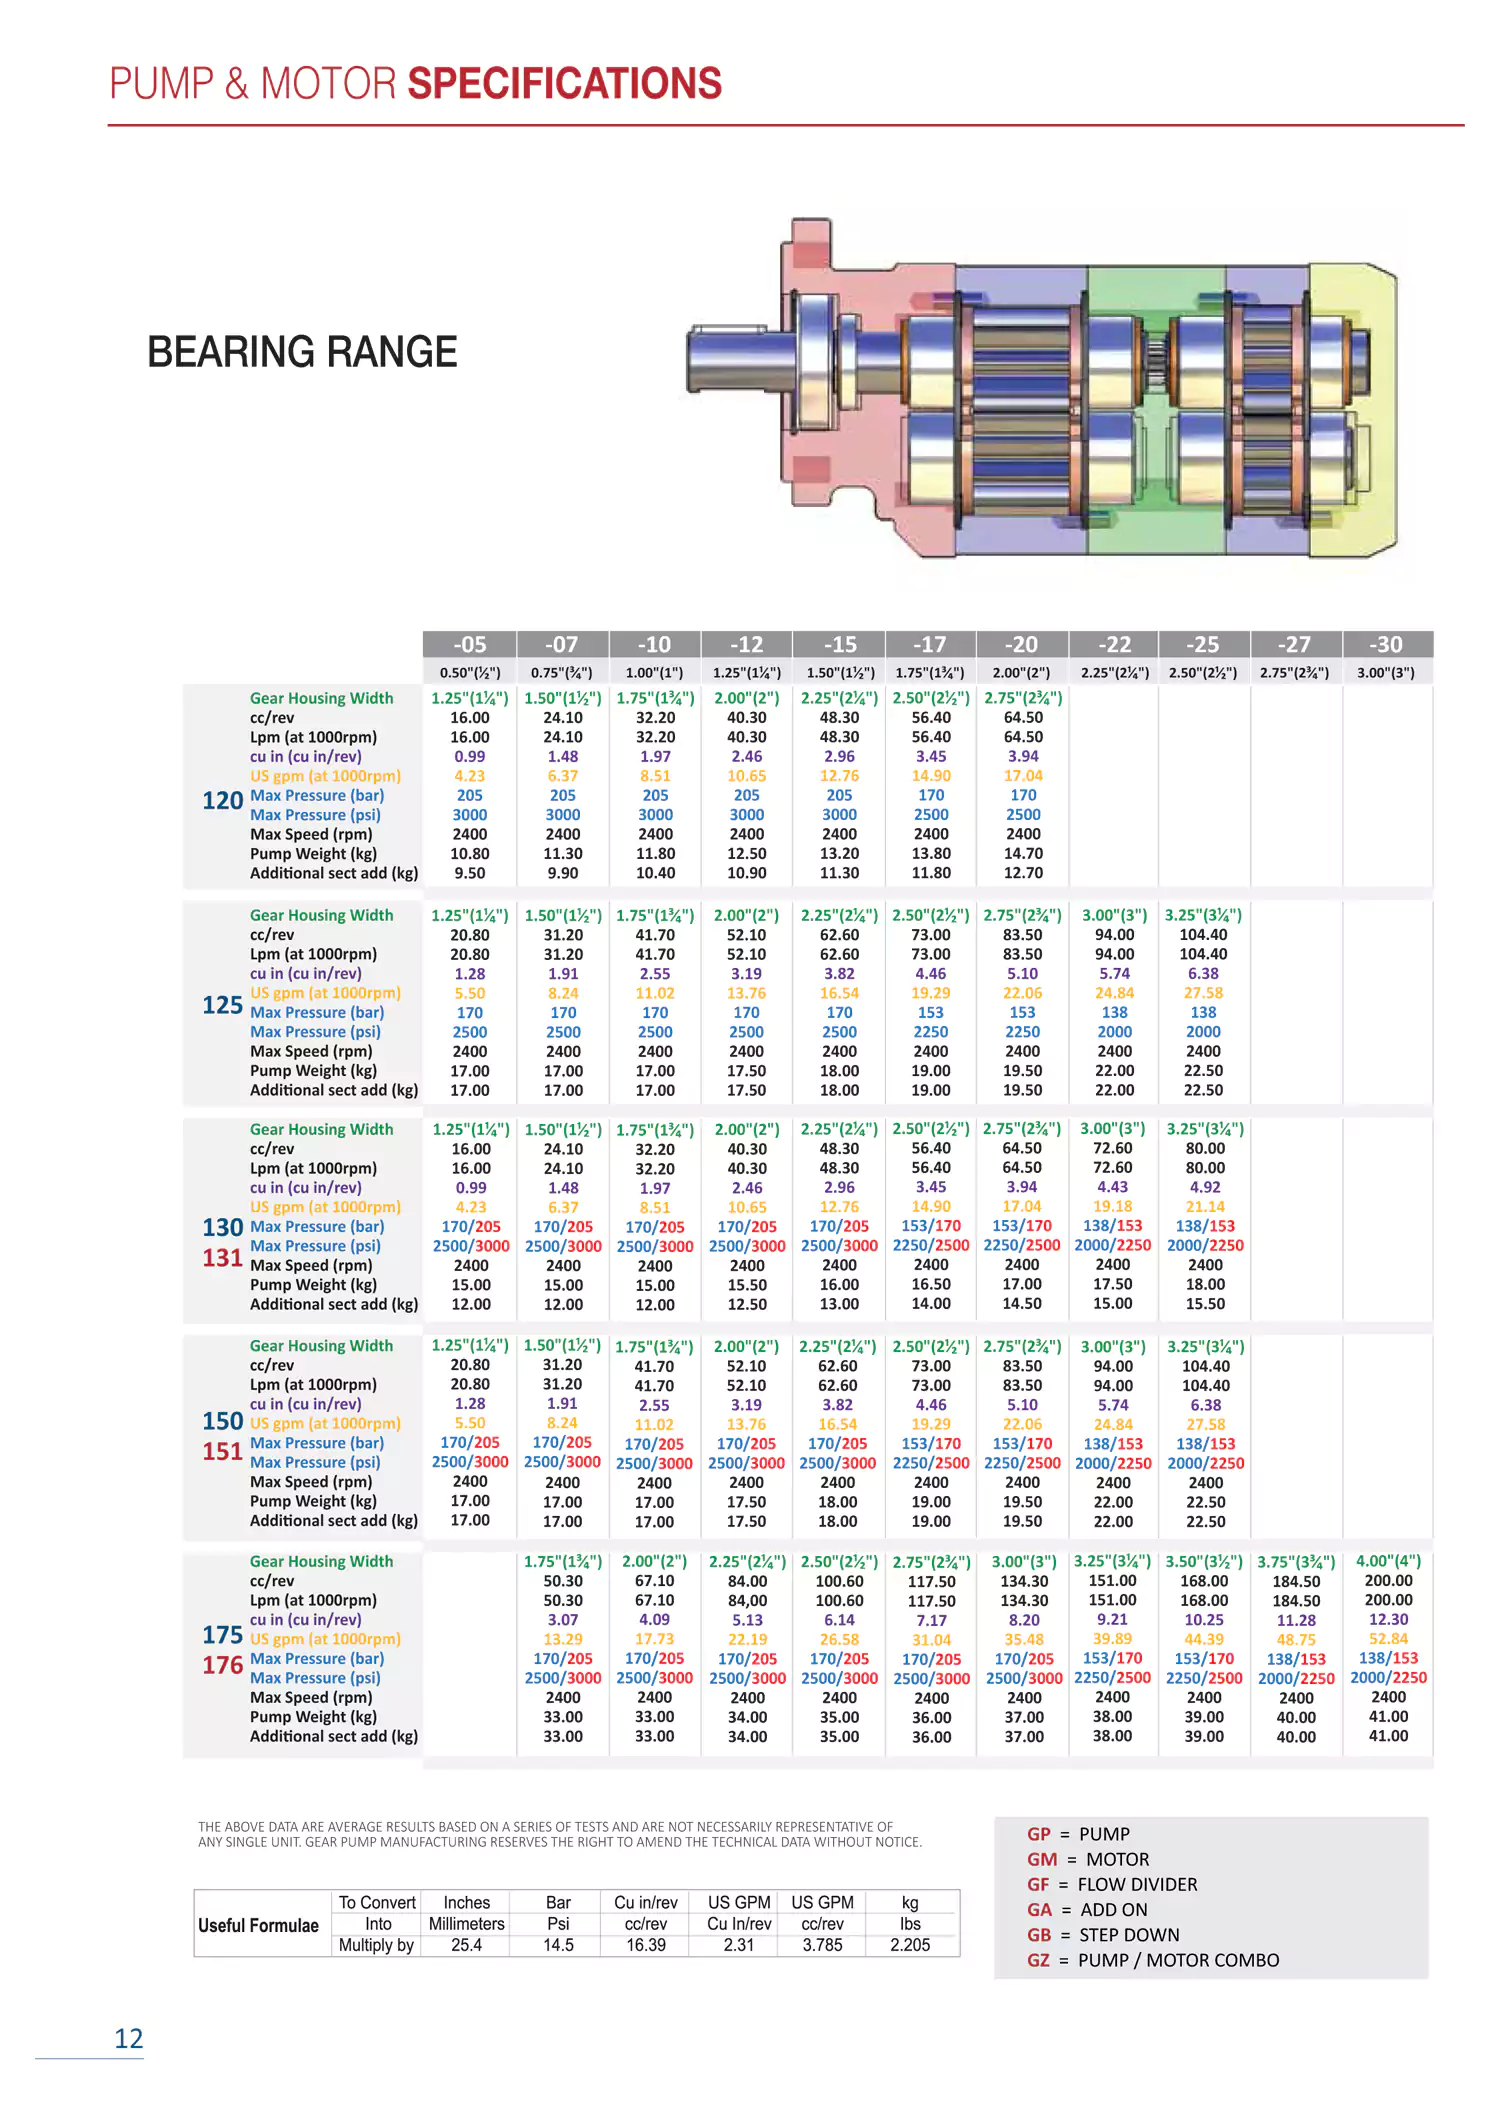 Page-12 - Bearing Range Pump Specifications